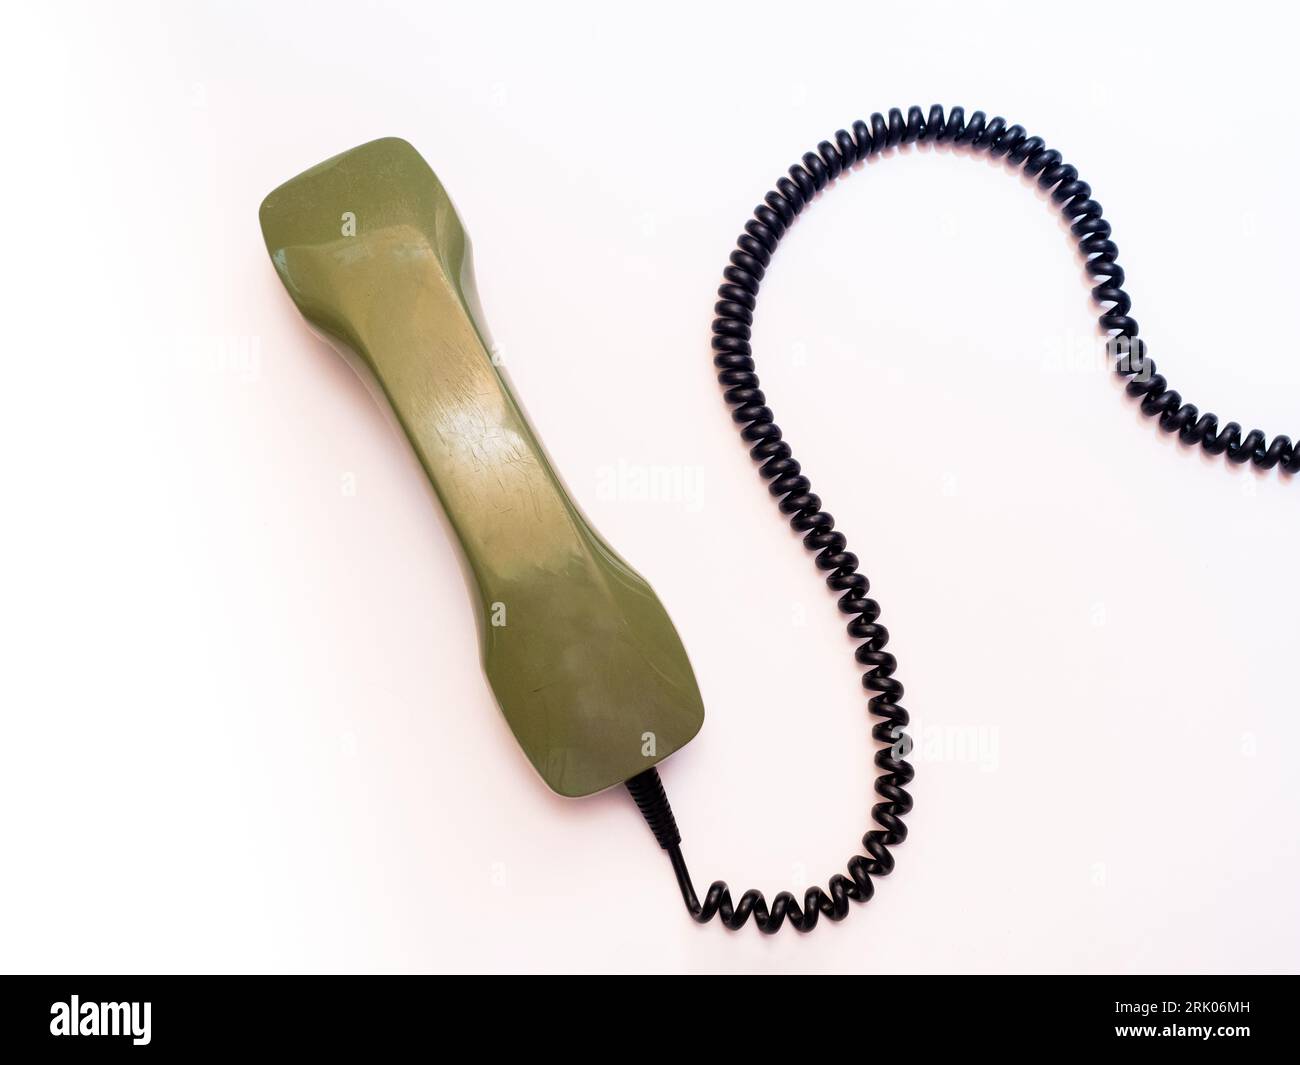 The handset of an old rotary phone lies on a white background. The black spiral cable winds in the picture. Stock Photo